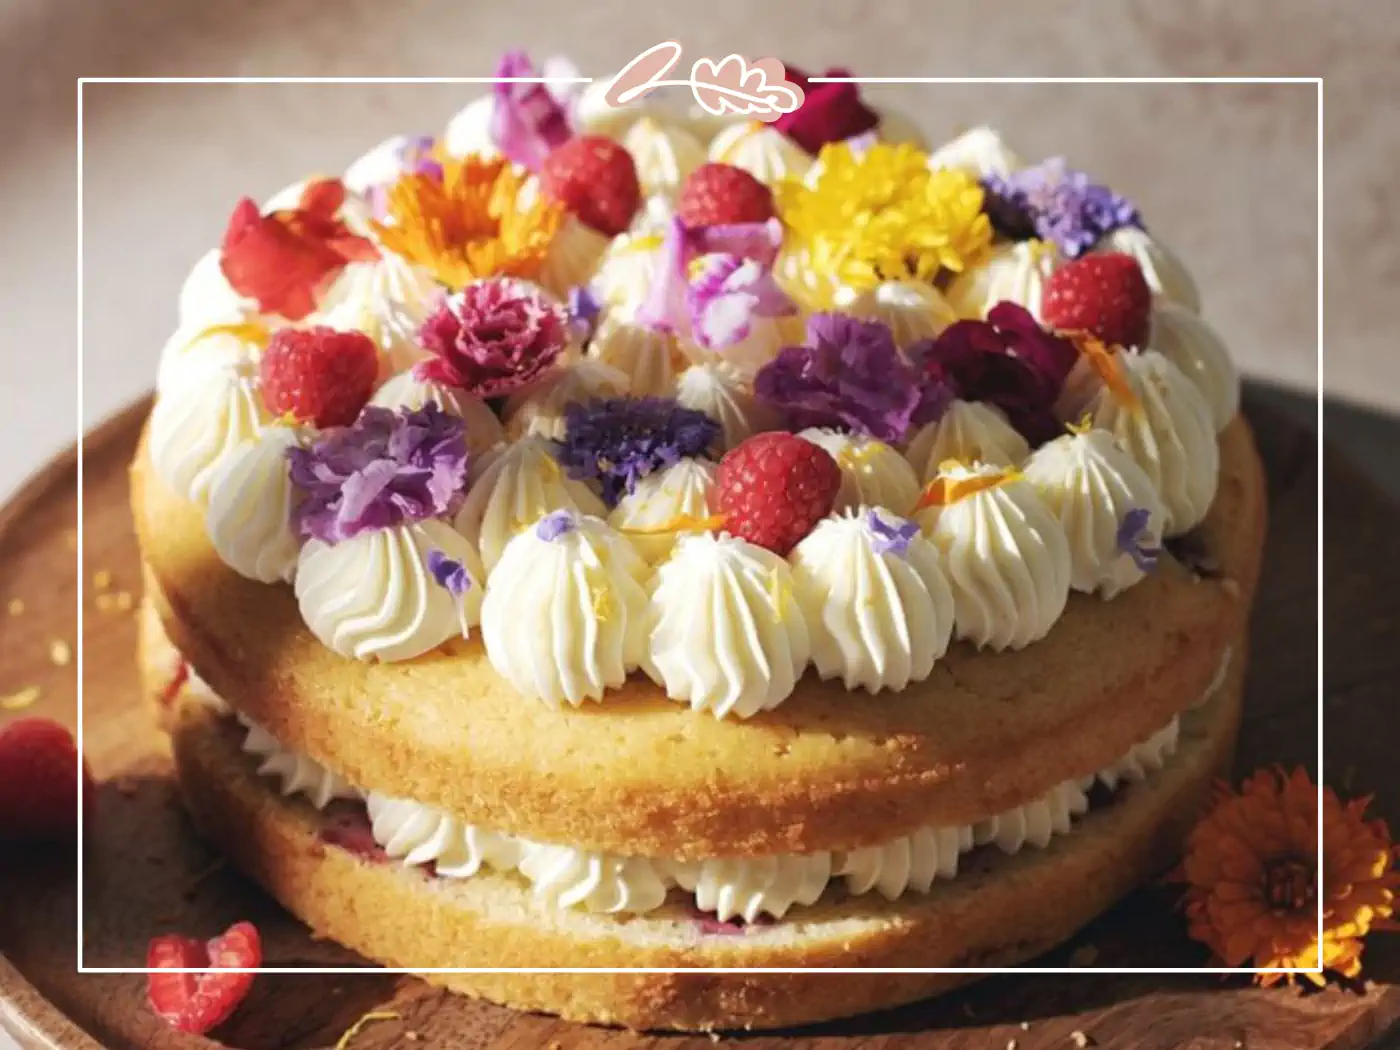 Cake beautifully decorated with colorful edible flowers and berries. Fabulous Flowers and Gifts.